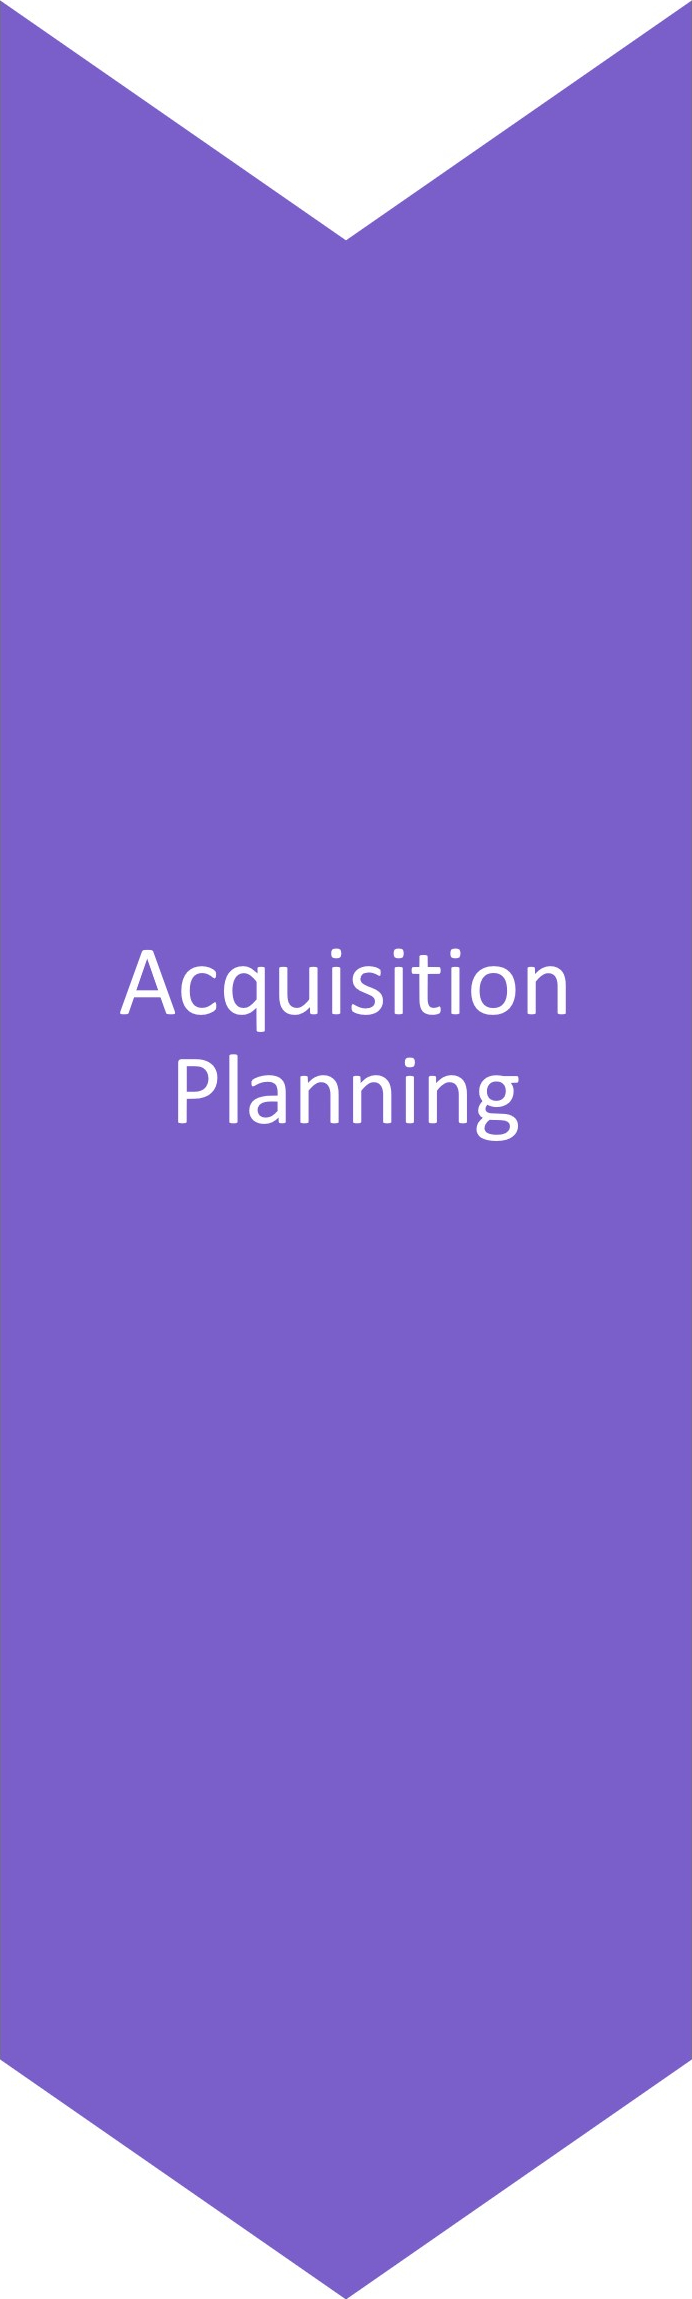 Phase 2: Acquisition Planning